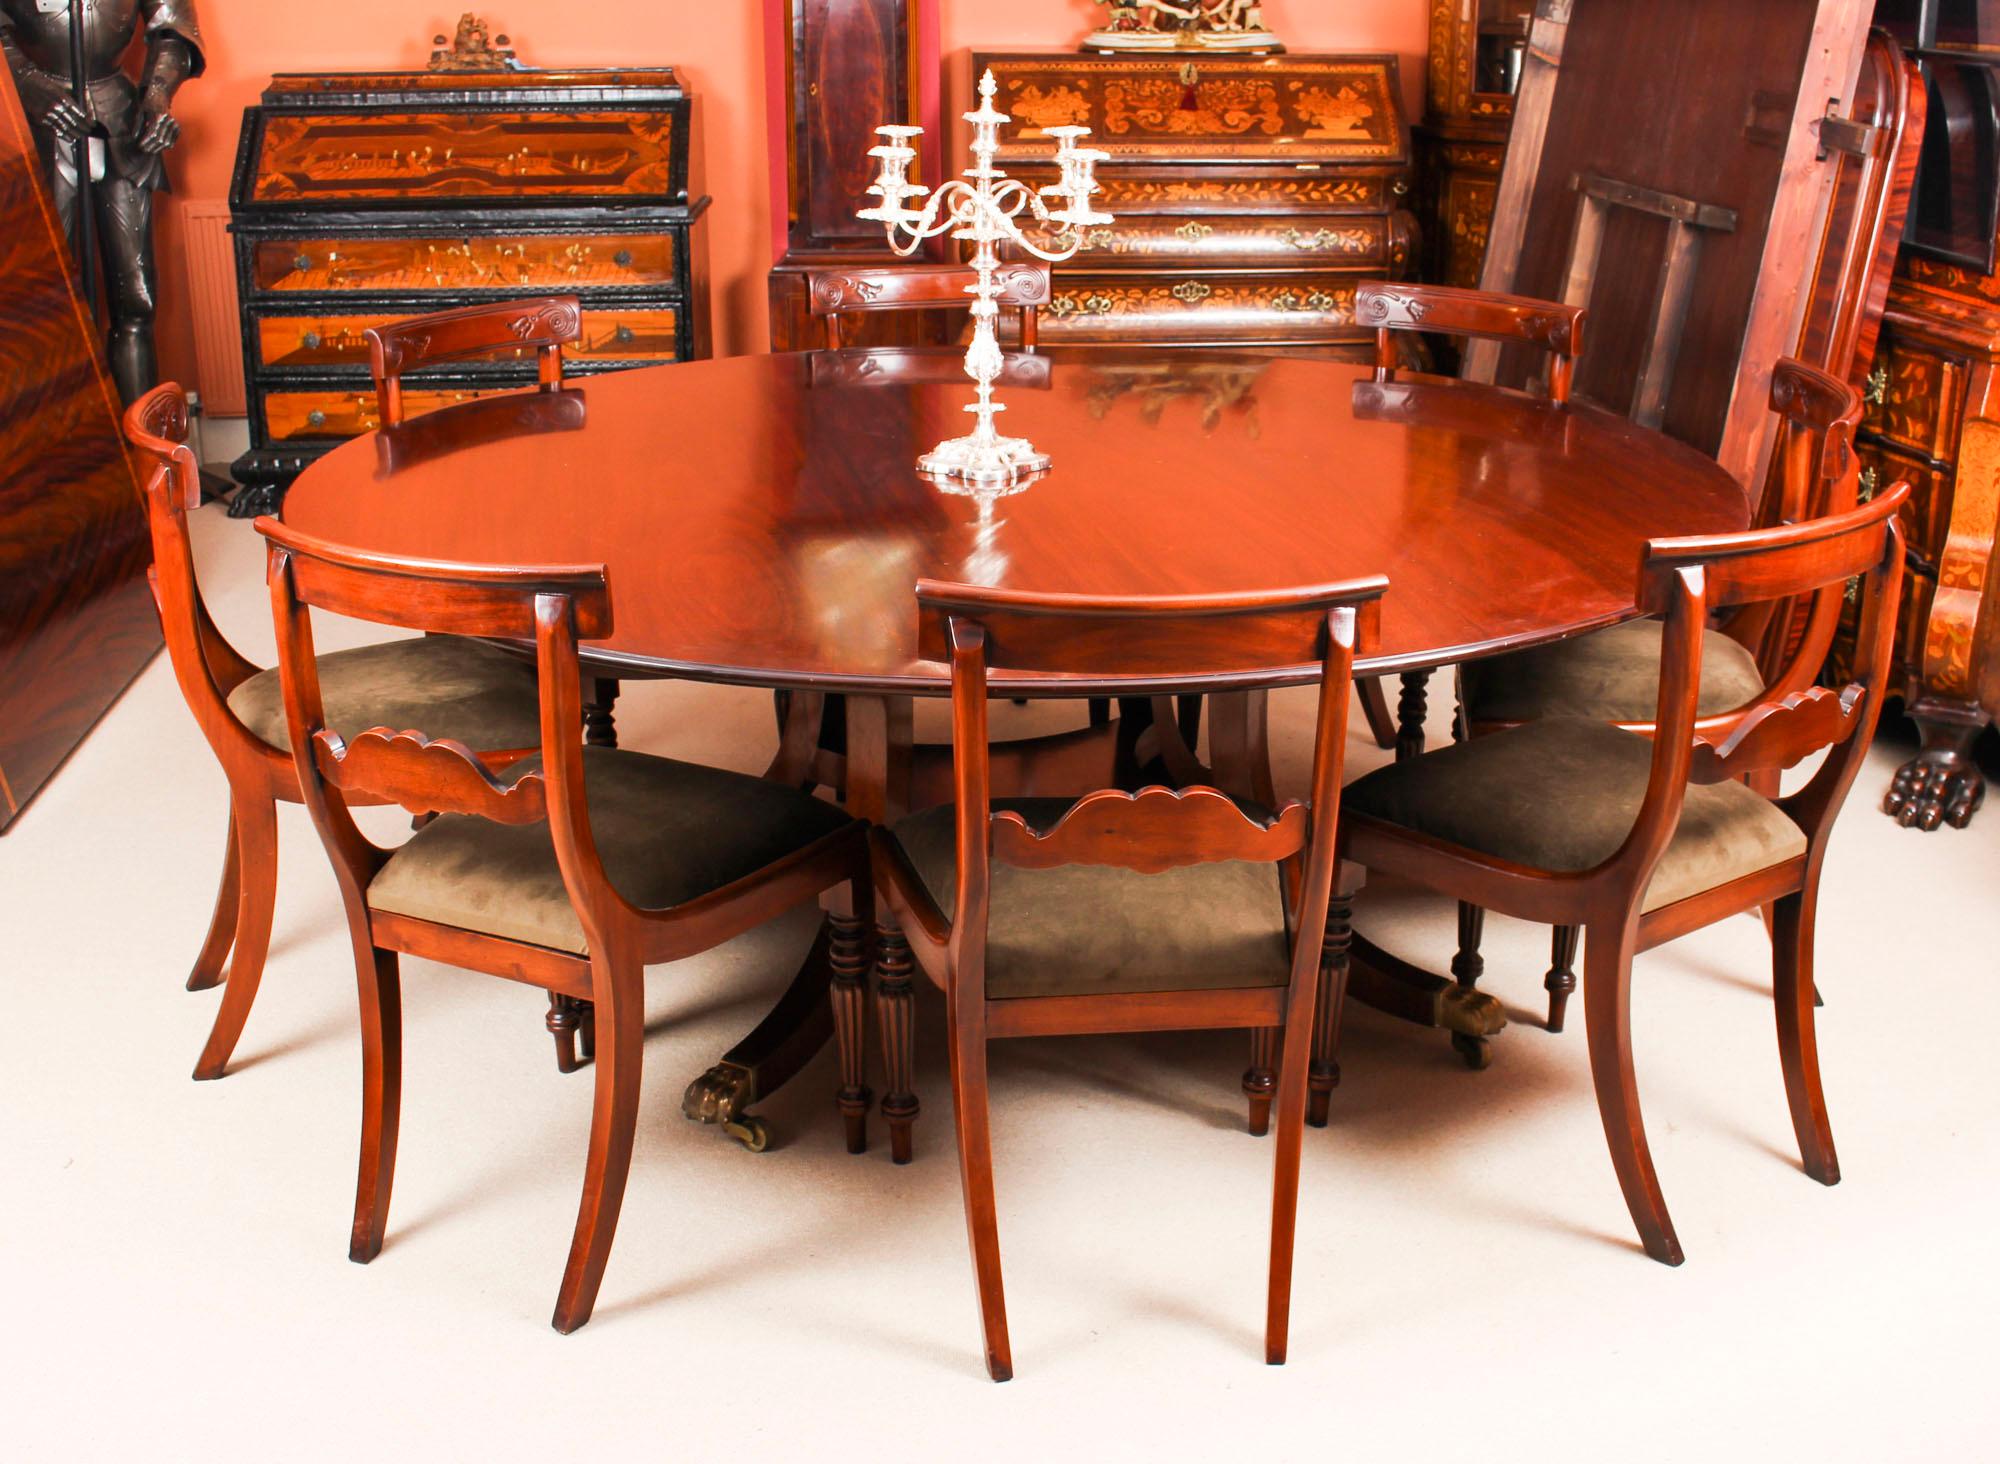 This is a beautiful dining set comprising a Regency style flame mahogany dining table made by the Master Cabinet Maker William Tillman and bearing his label on the underside, circa 1970 in date with a set of eight bespoke dining chairs.

The table